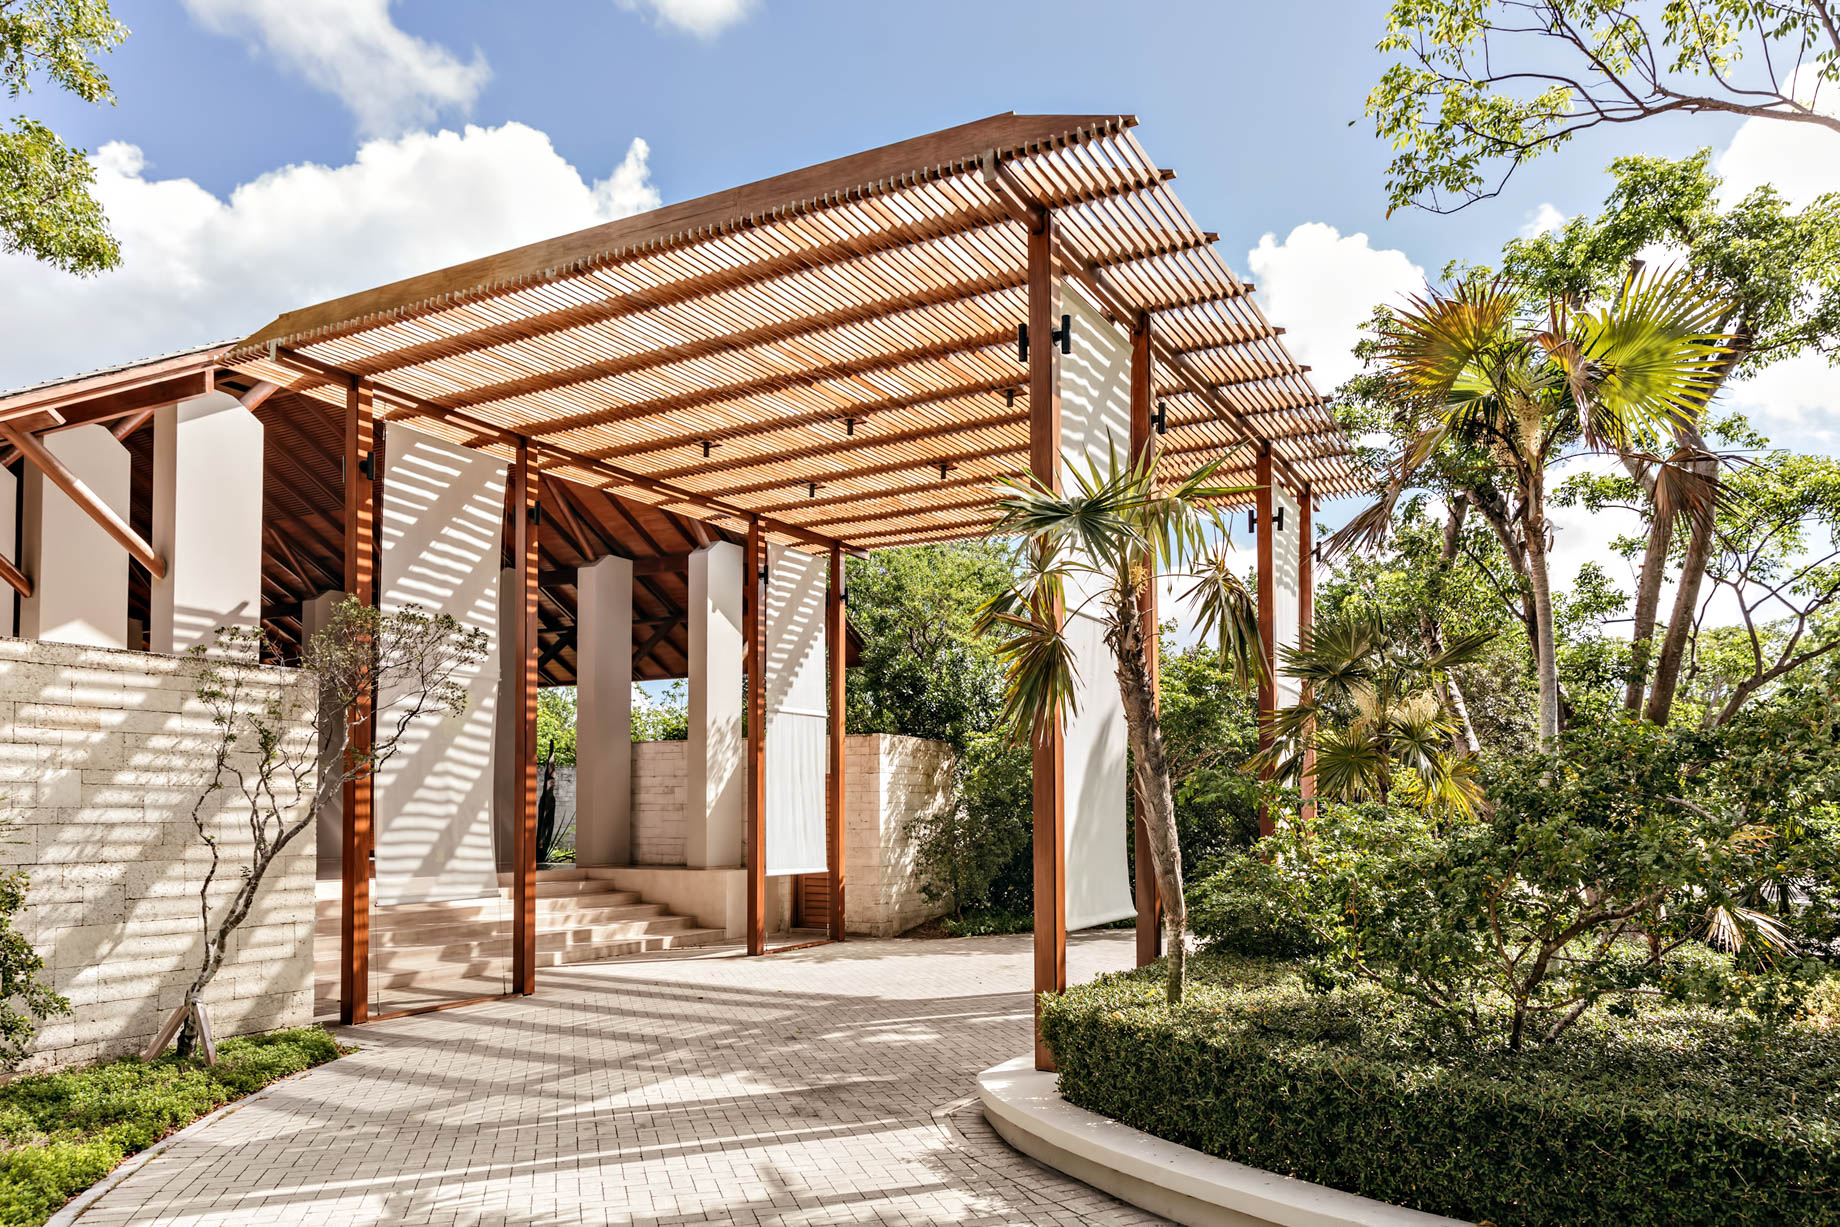 Amanyara Resort – Providenciales, Turks and Caicos Islands – Exclusive Wellness Architecture